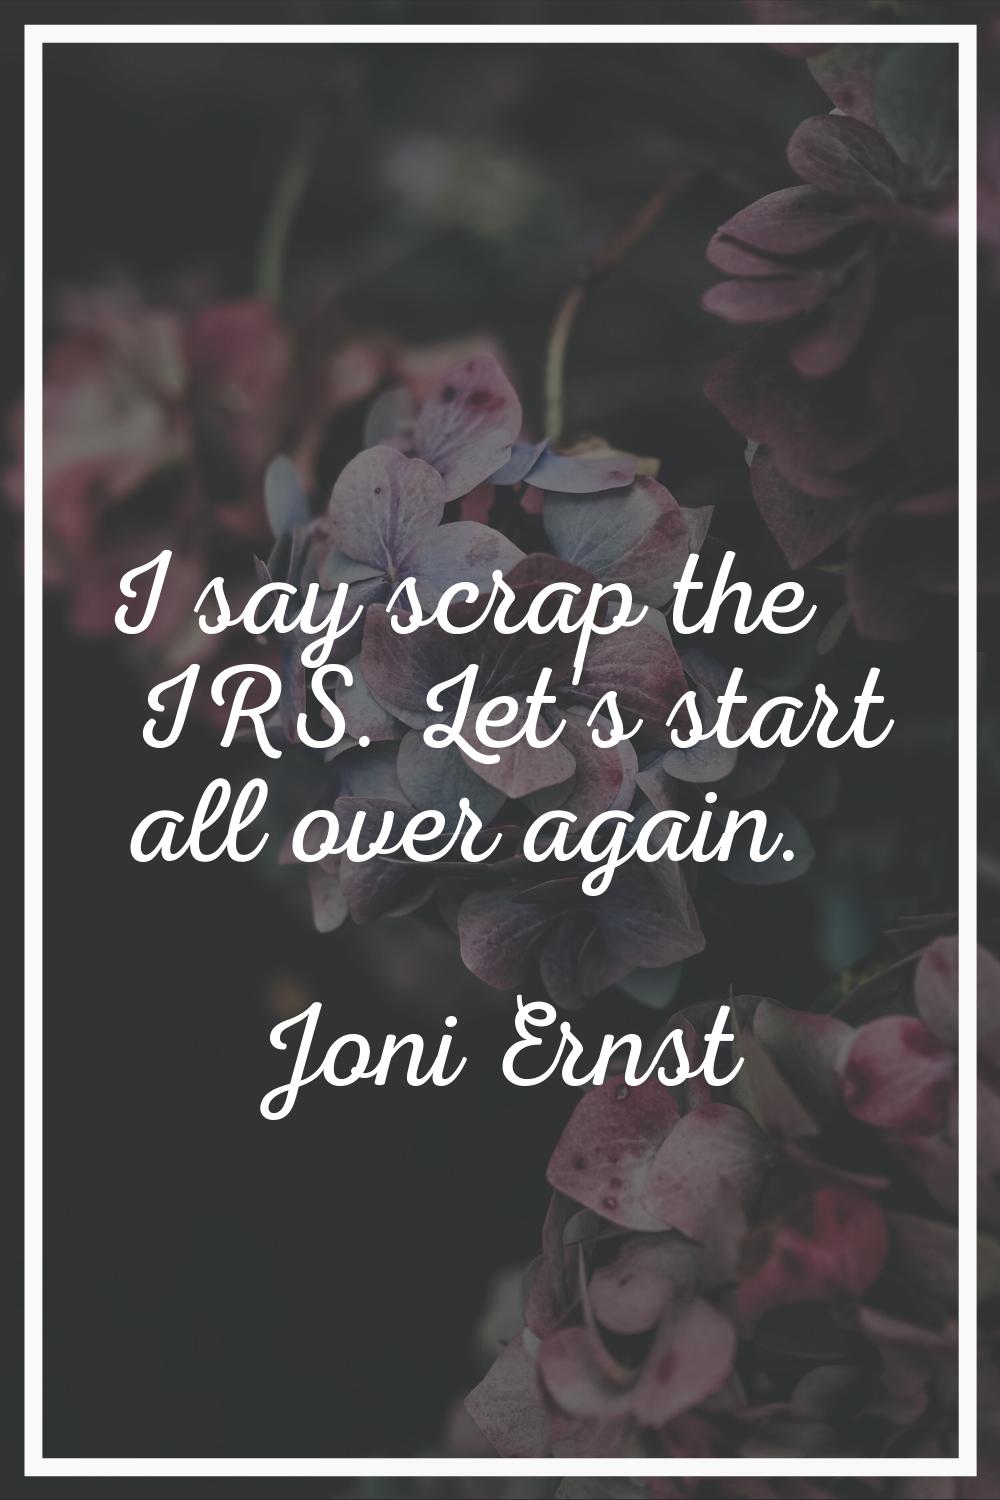 I say scrap the IRS. Let's start all over again.